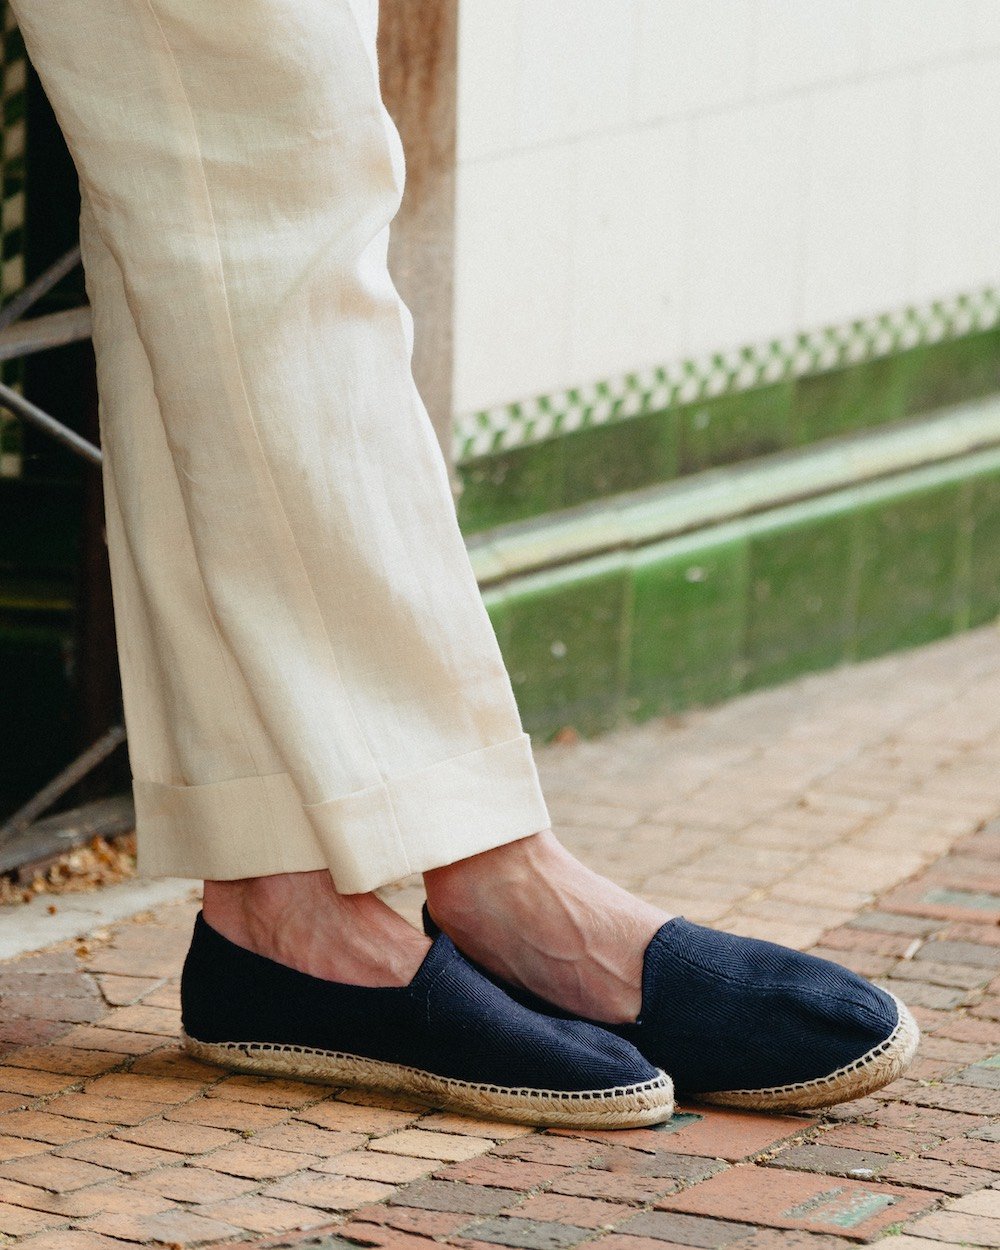 Espadrilles: Style, occasion, and 